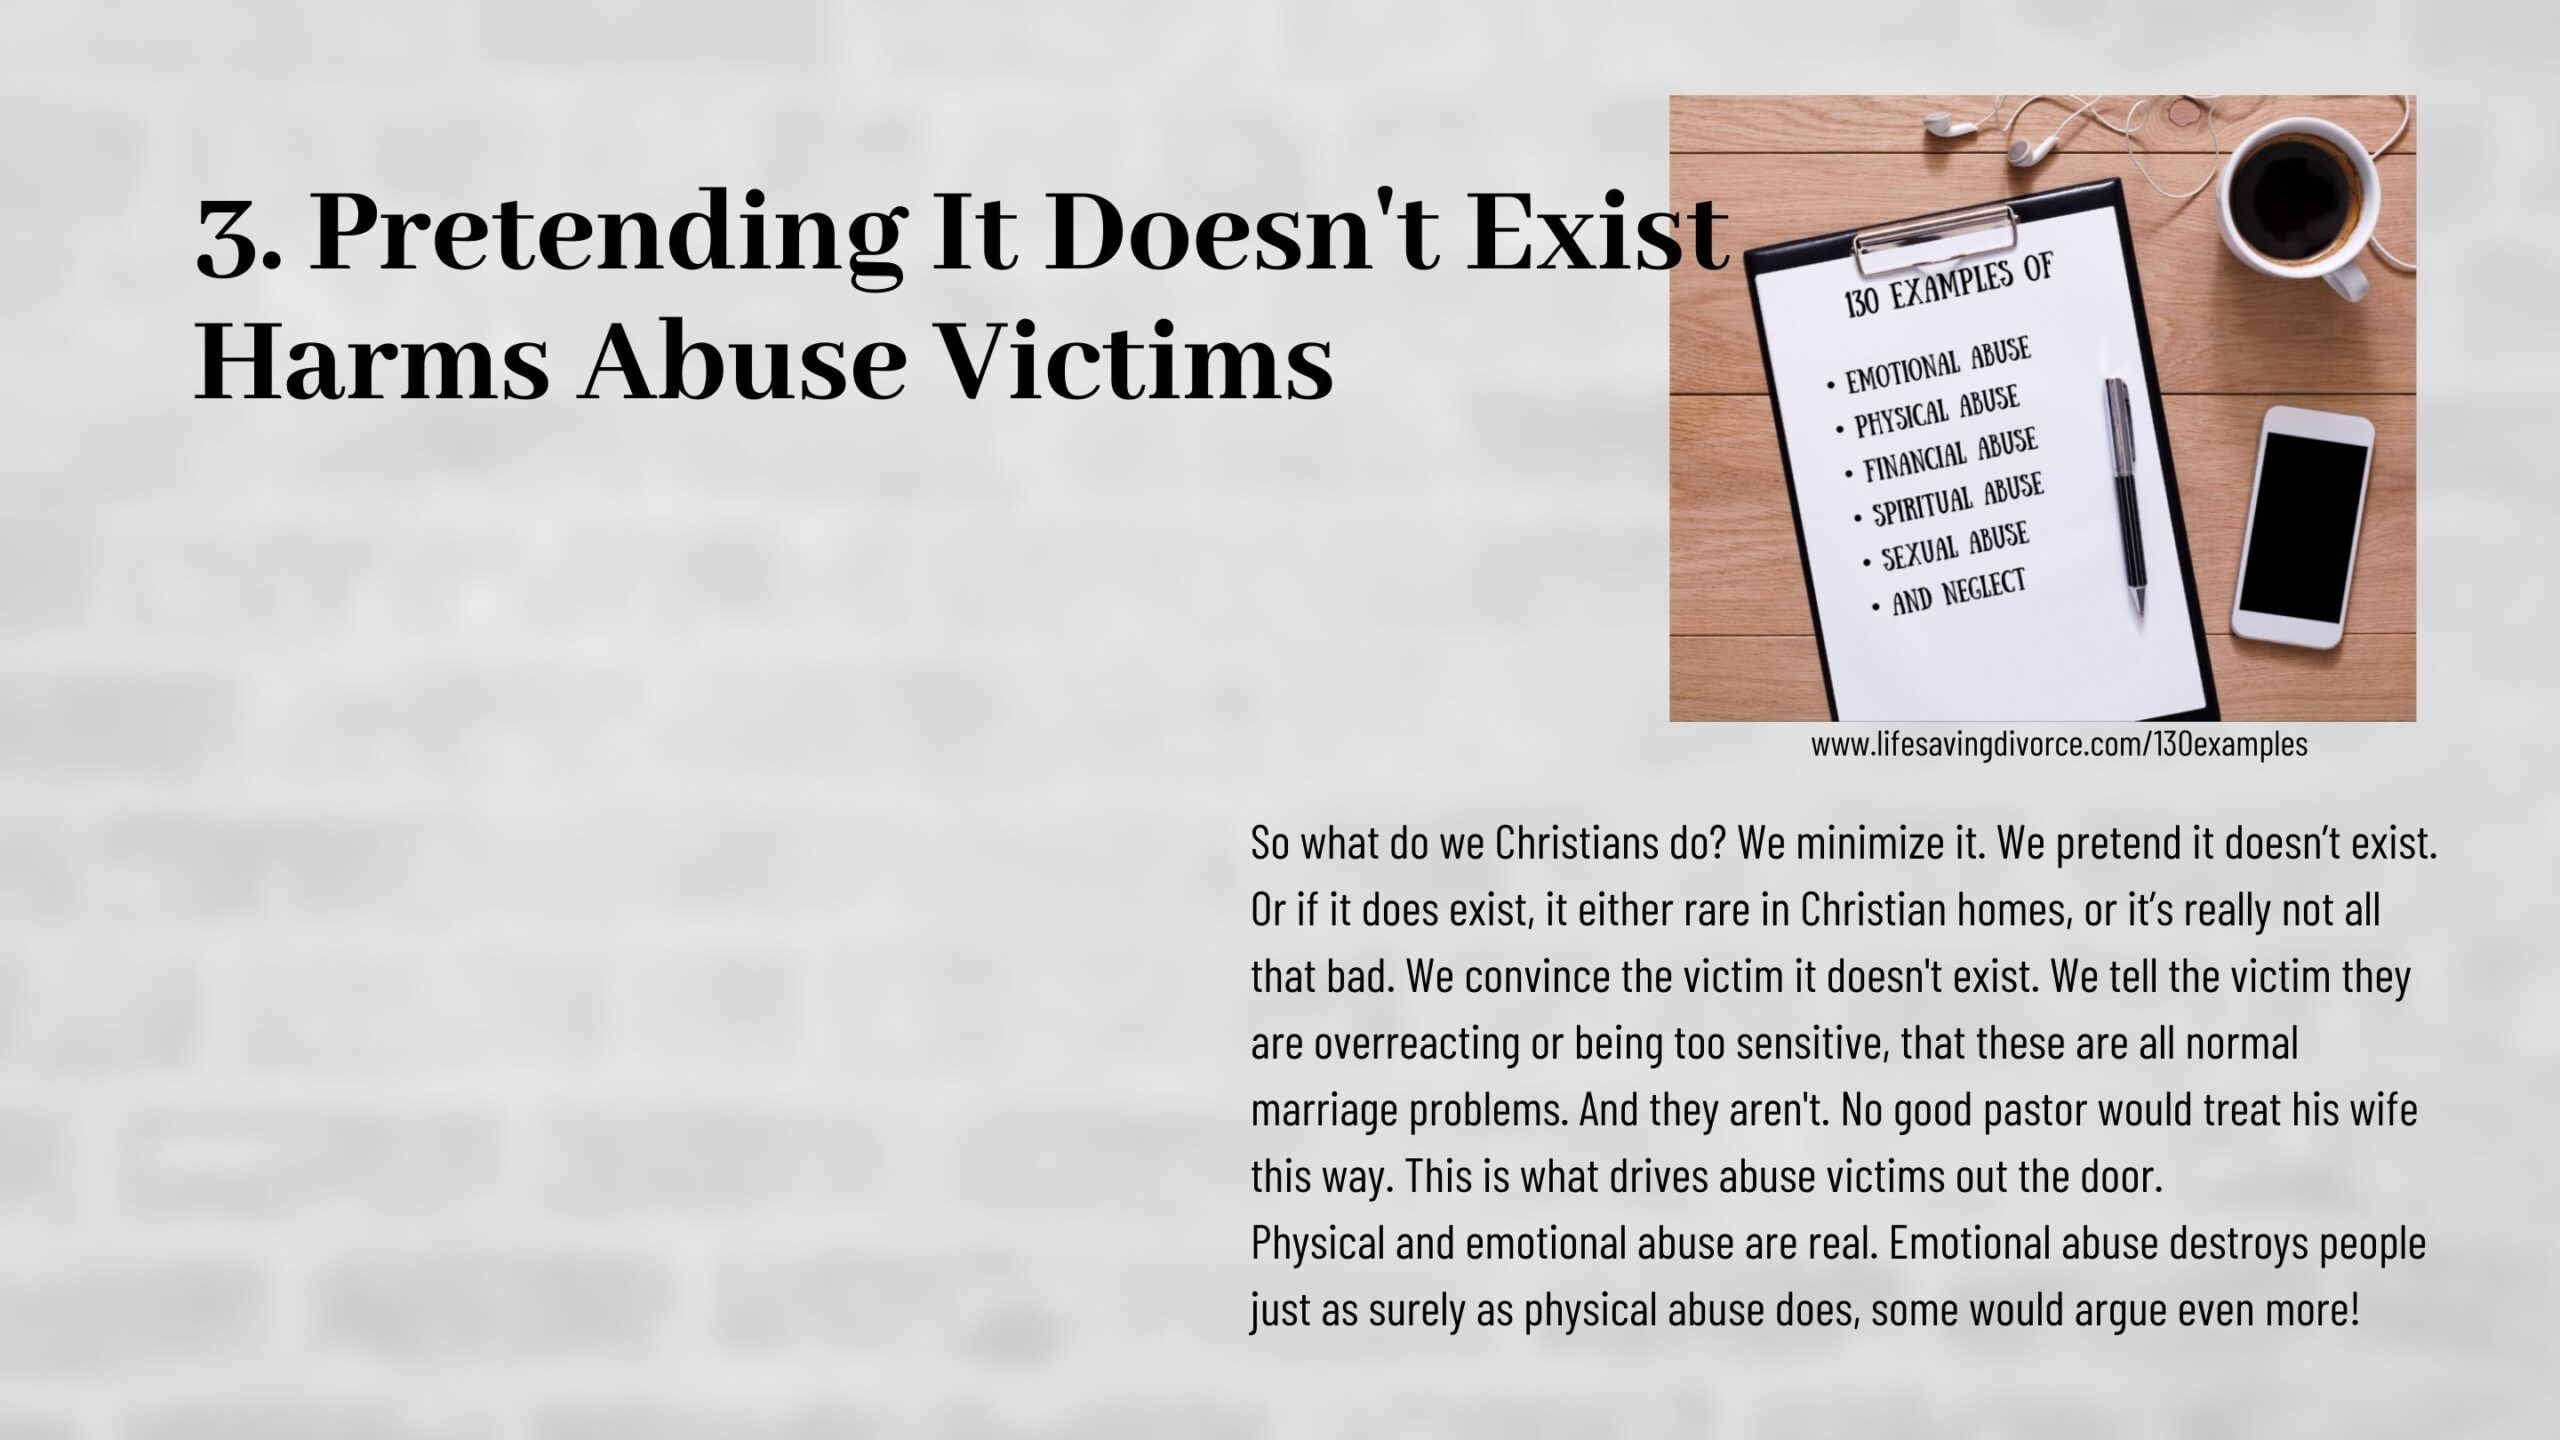 Pretending abuse doesn't exist harms abuse victims